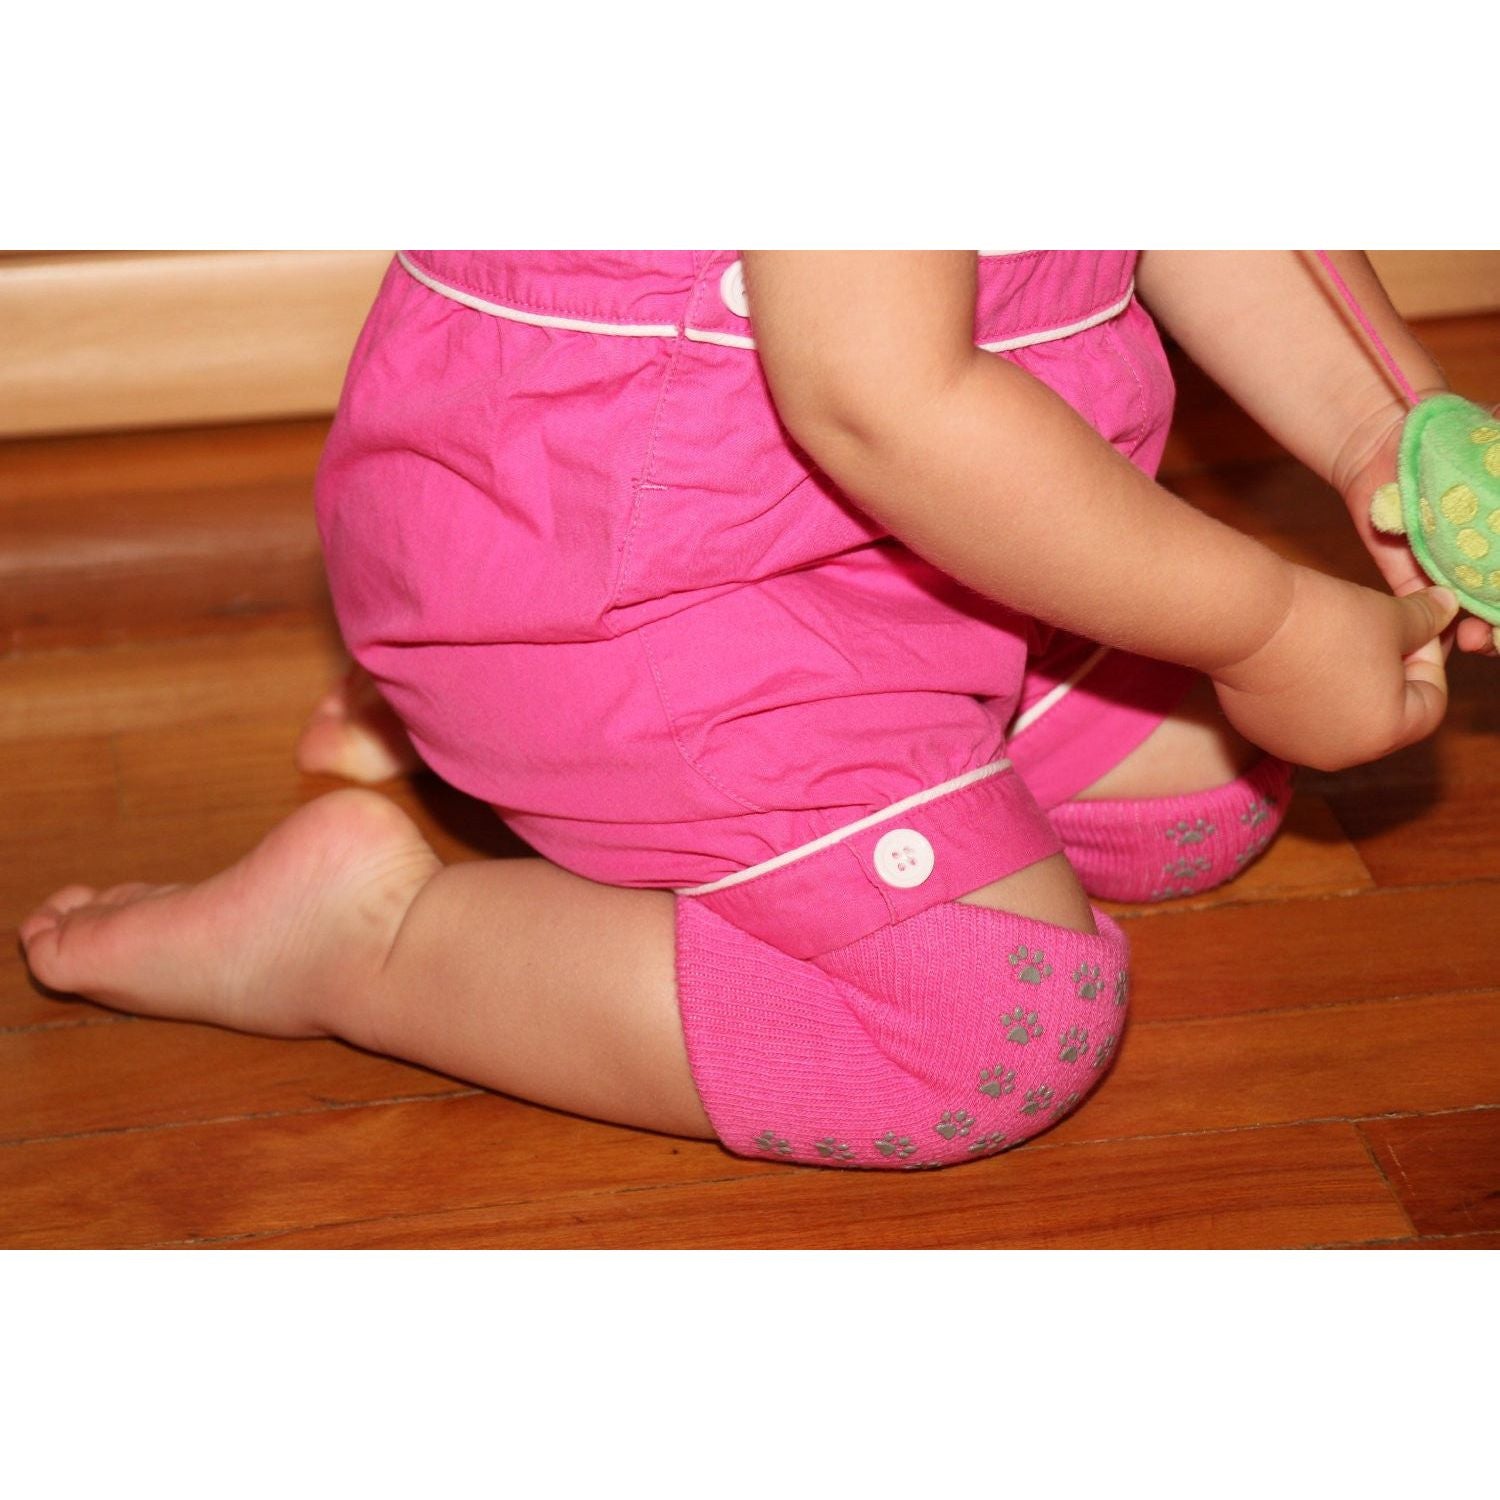 soft pink knee pads with rubber traction paws for girls